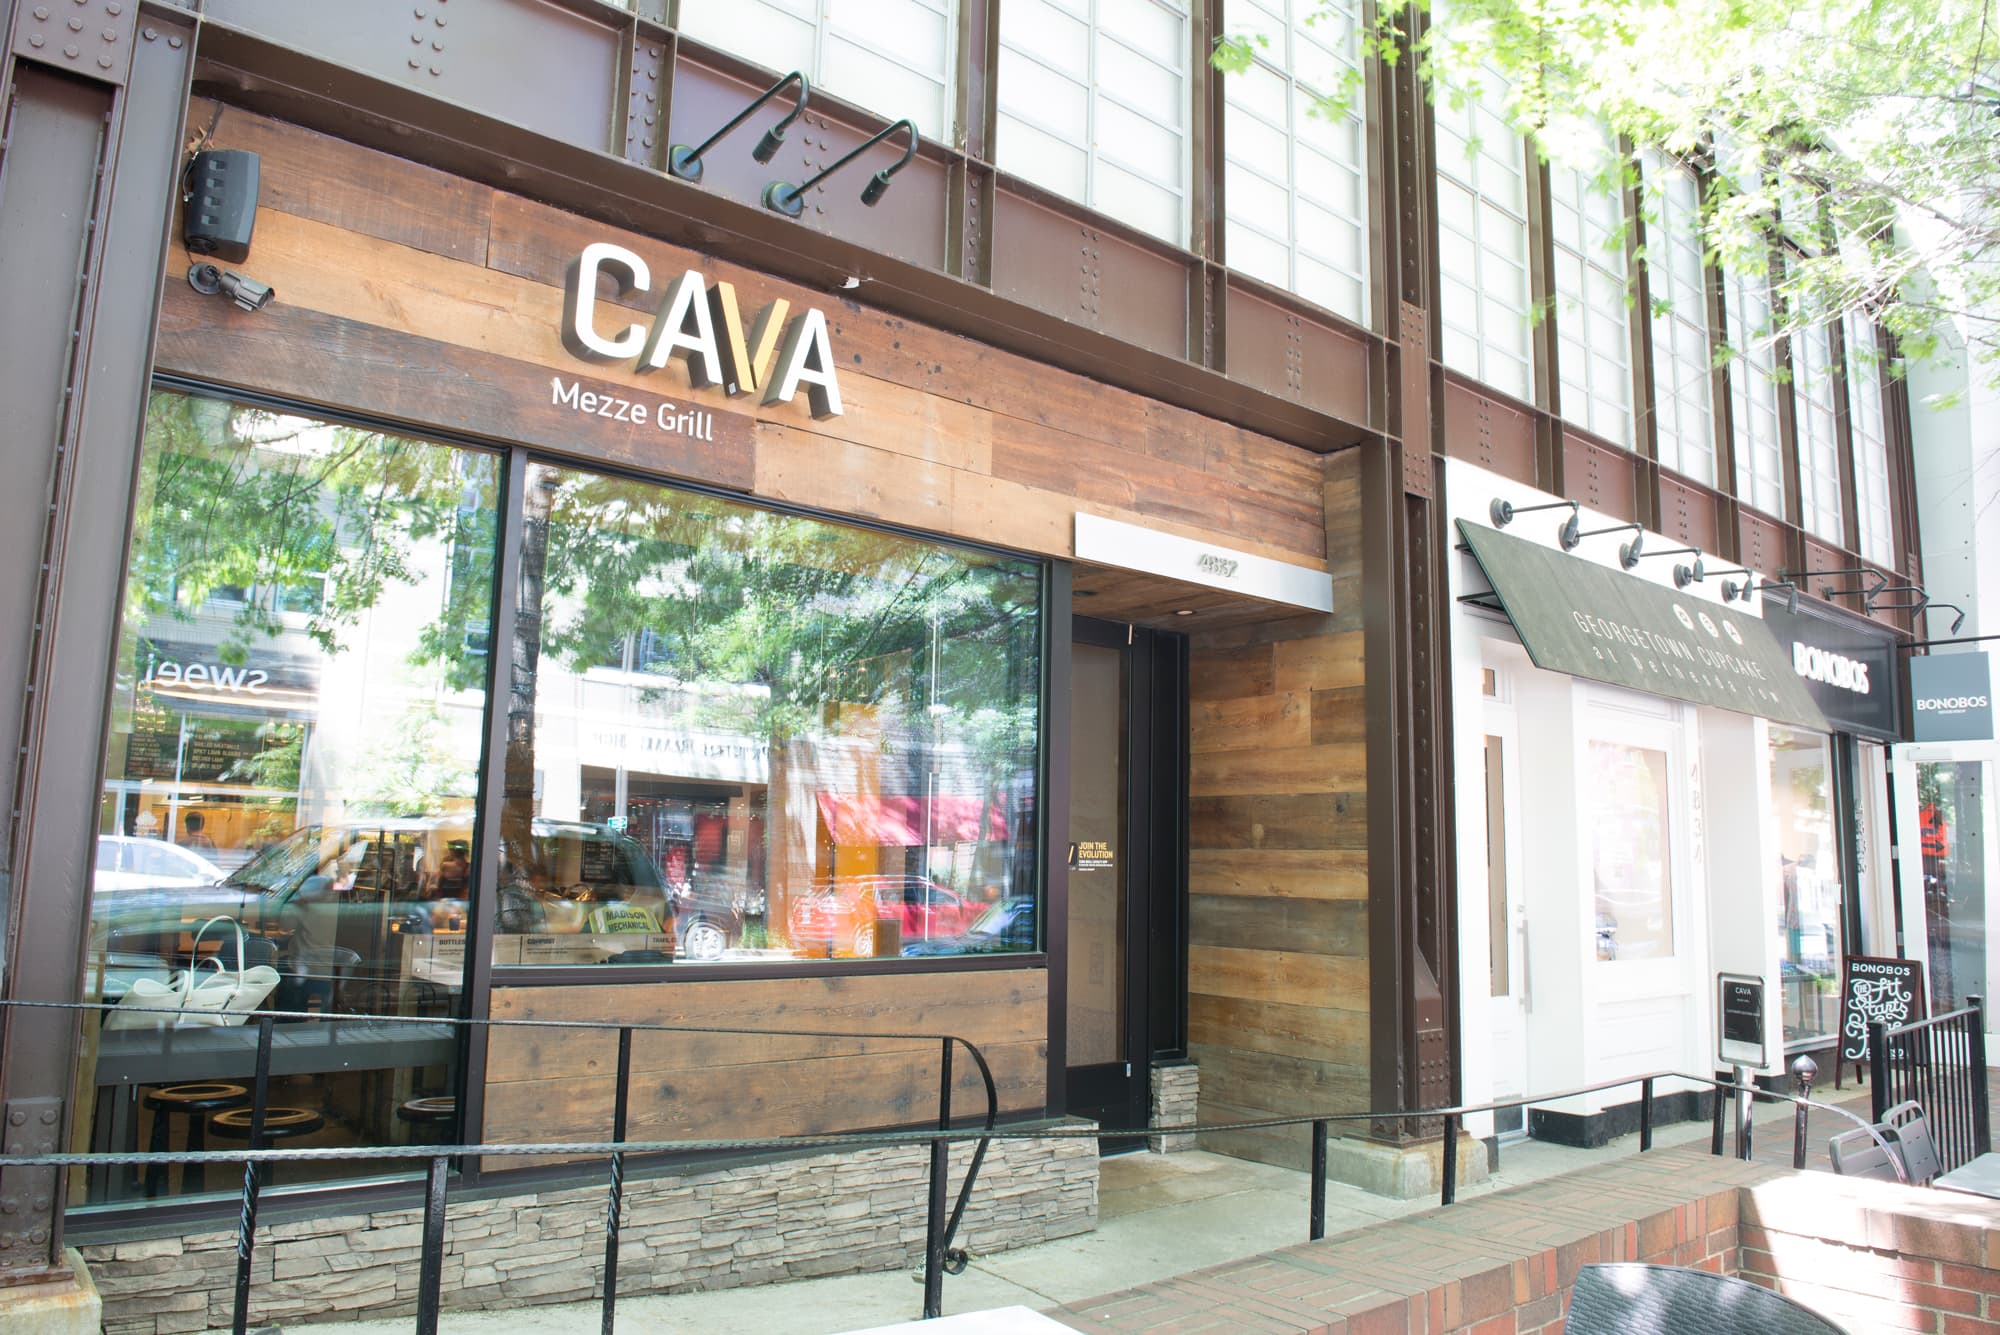 Cava puts vision on suburban growth as pandemic changes consumer trends